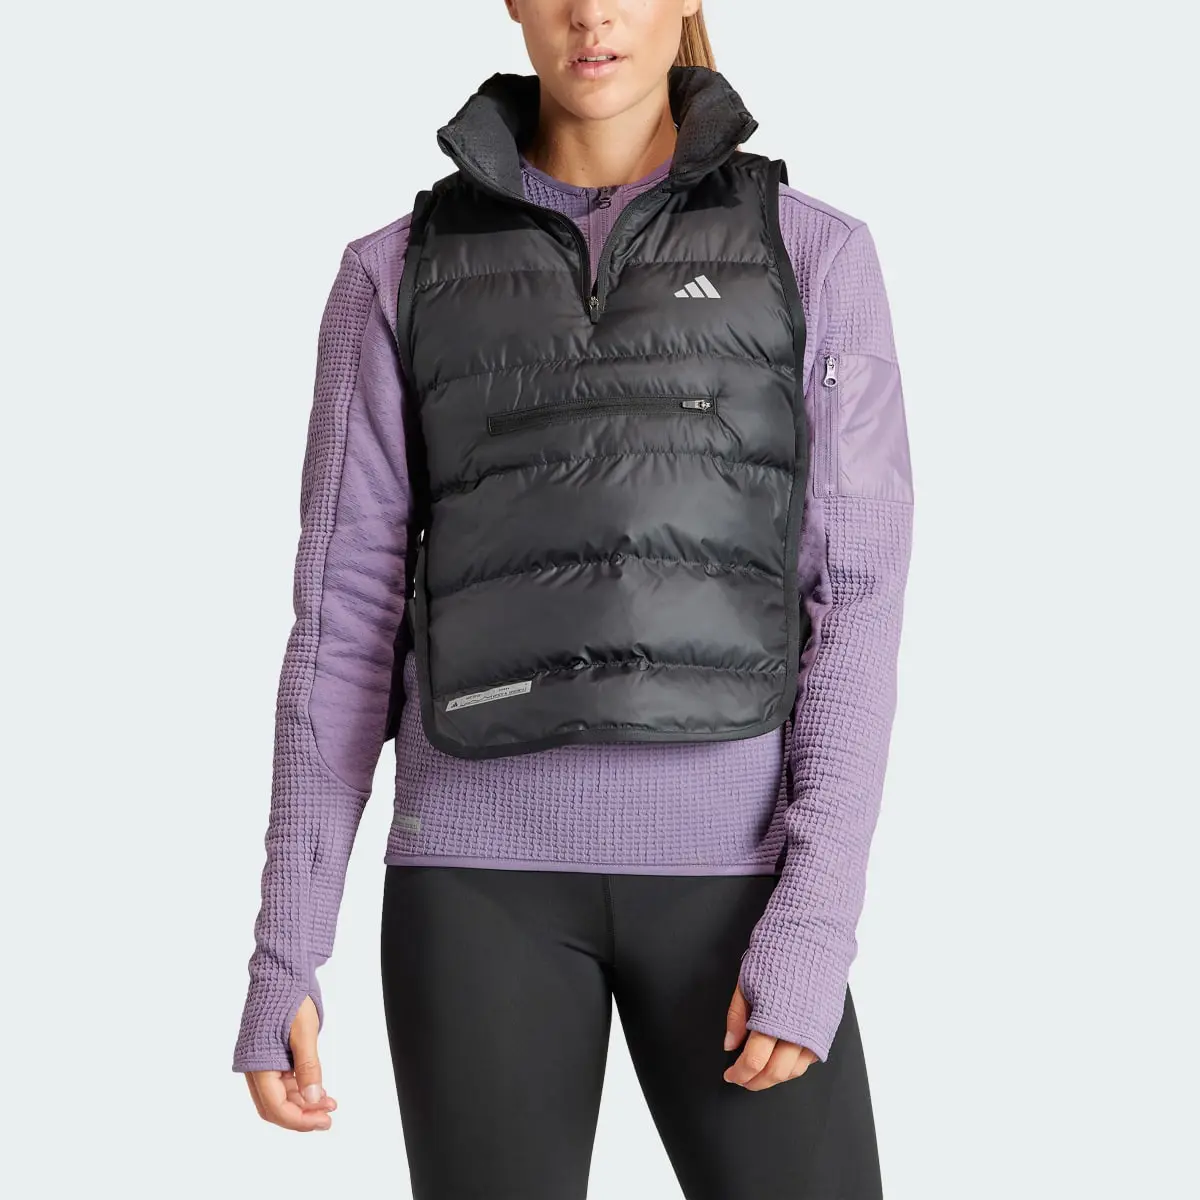 Adidas Ultimate Running Conquer the Elements Body Warmer Vest. 1